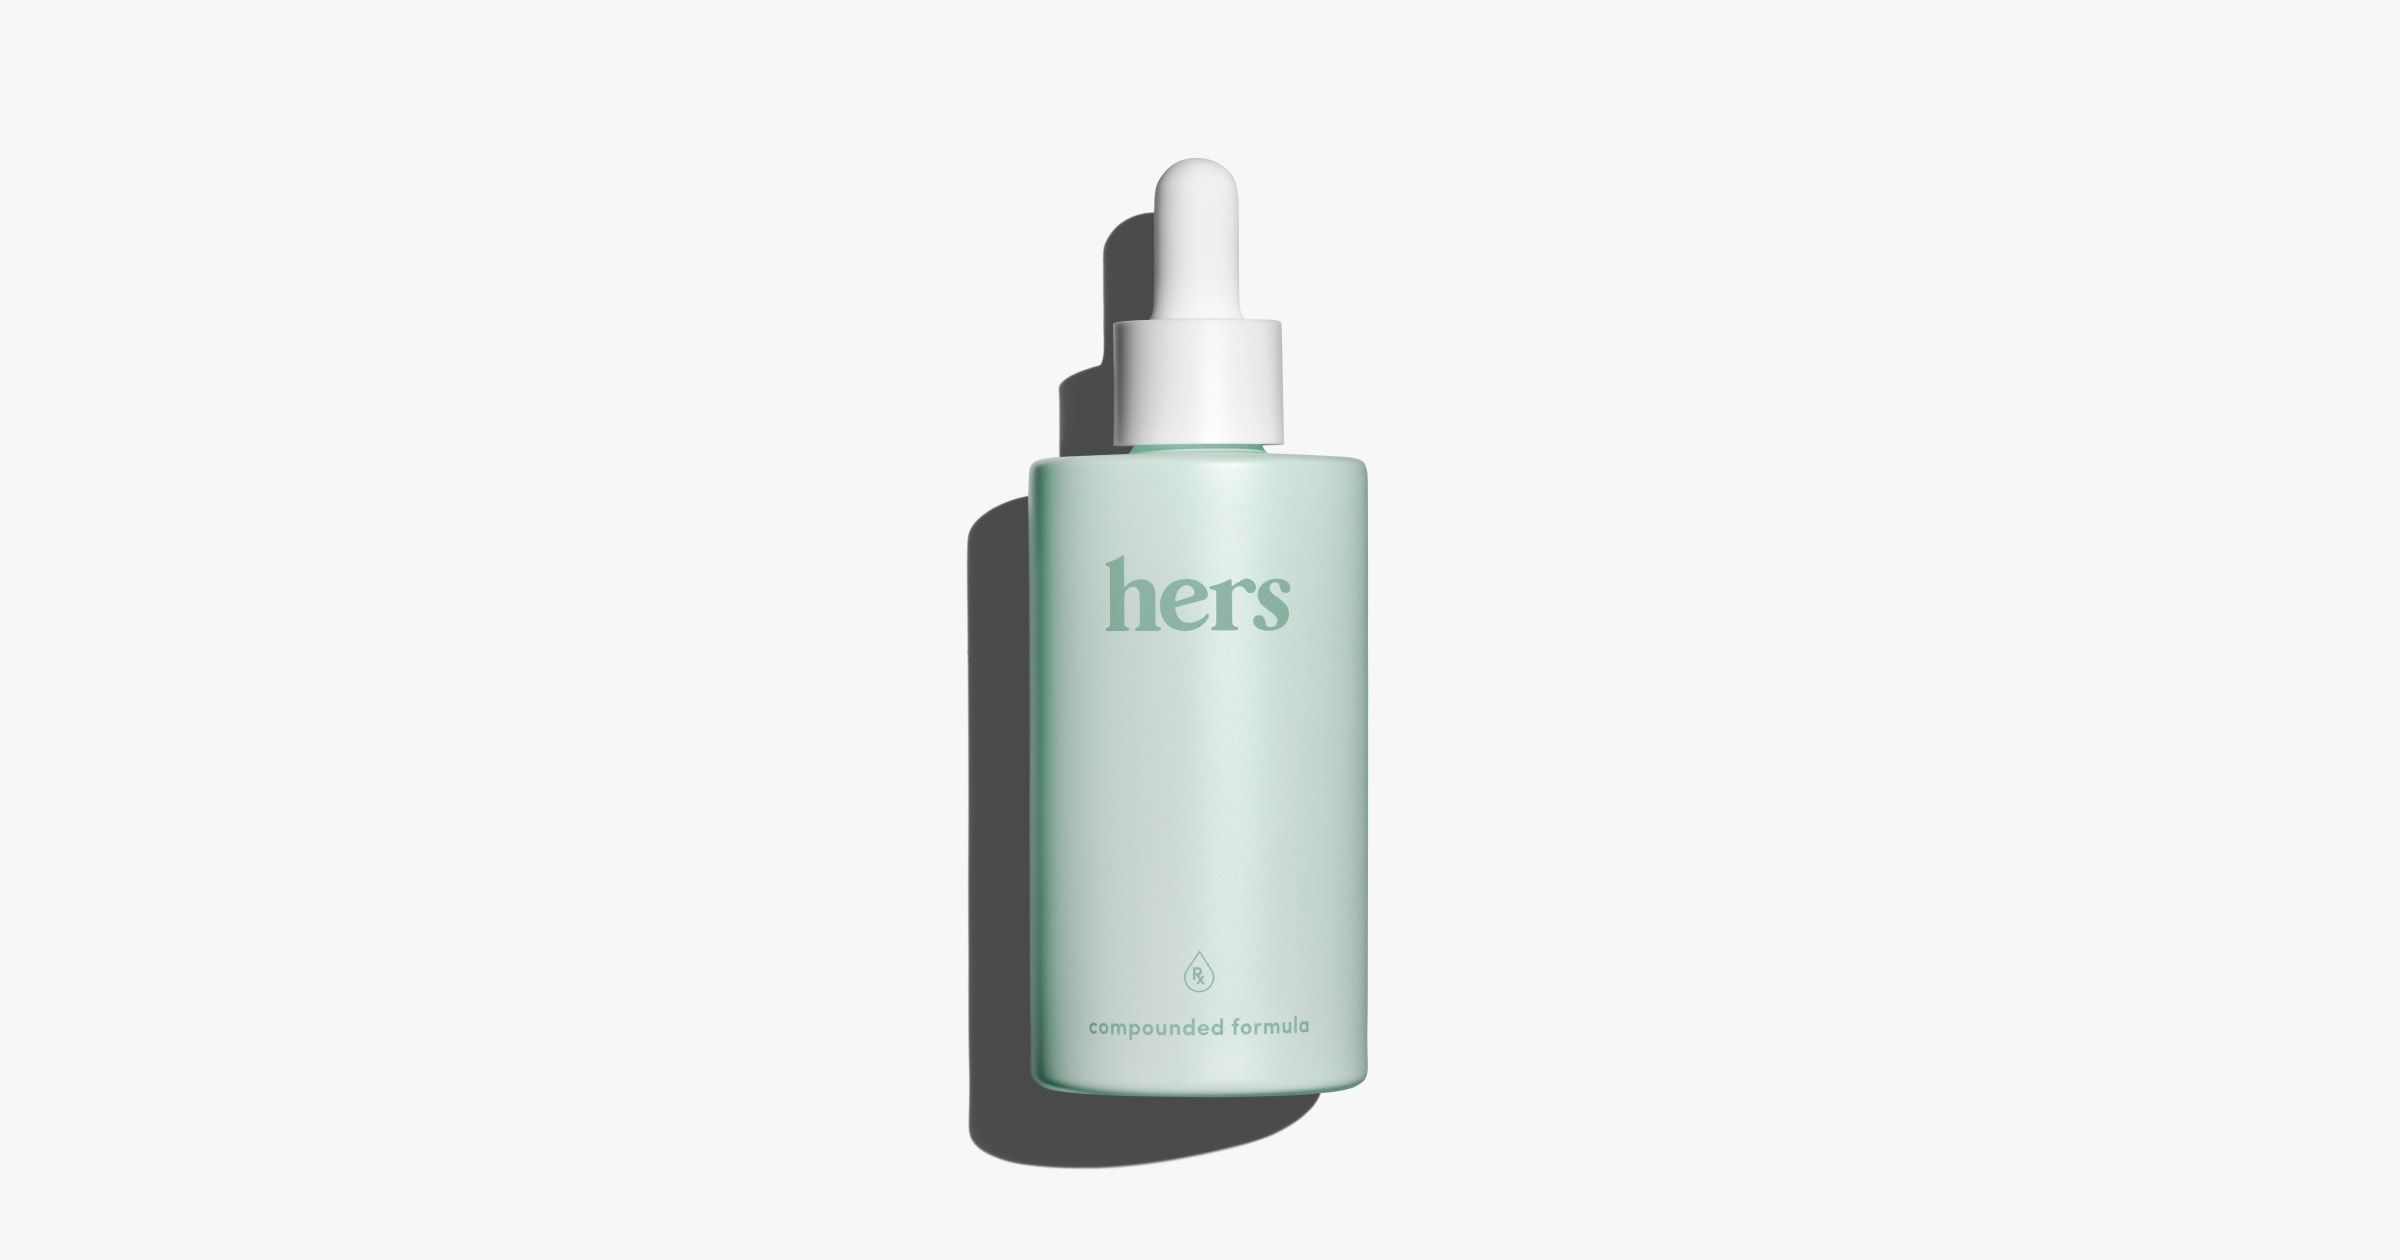 Formulated with dermatologists | Hers, Inc.